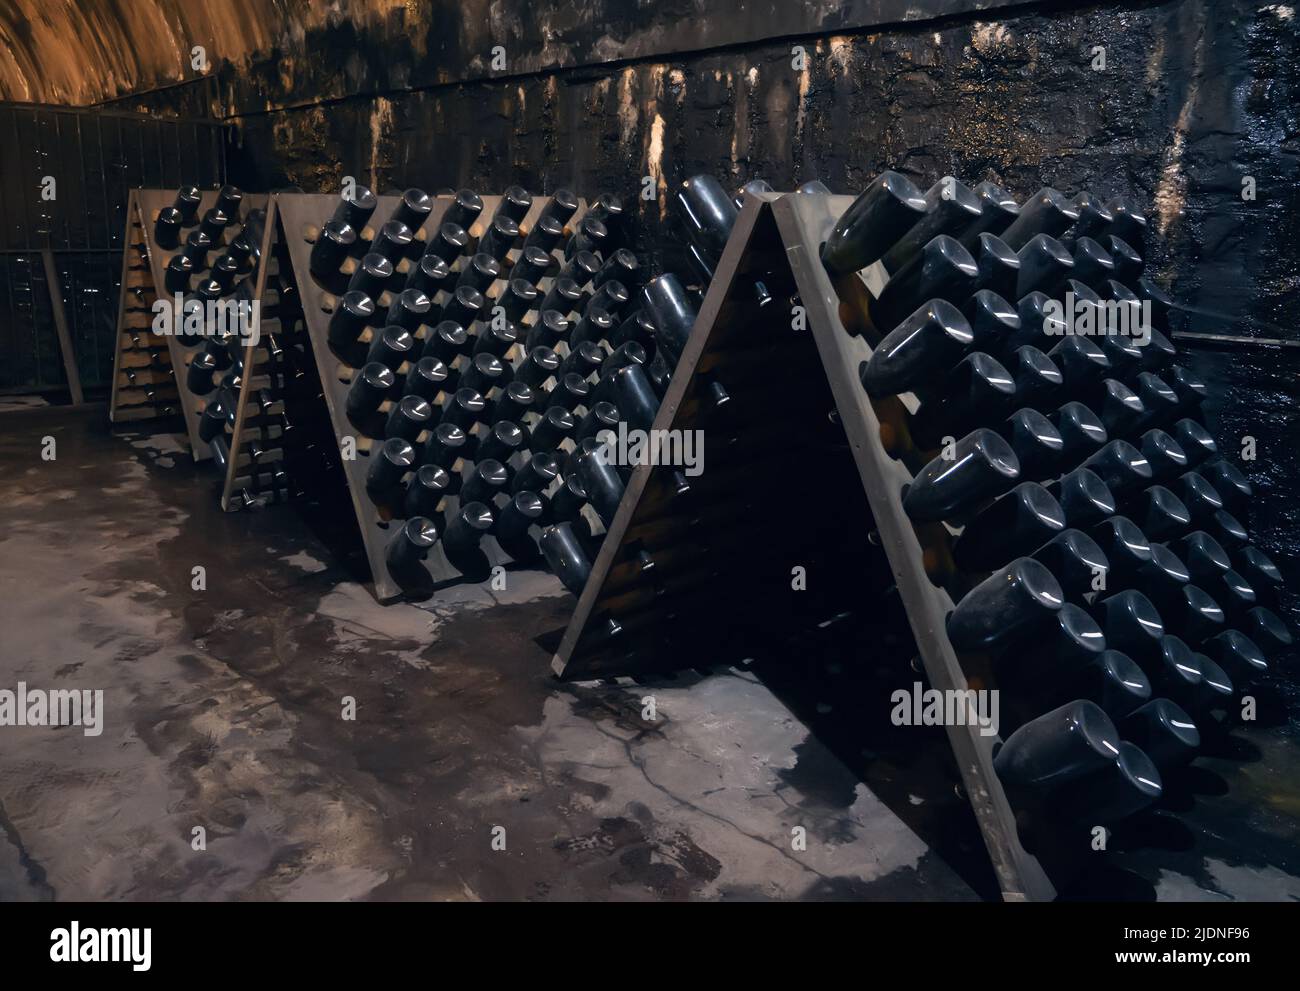 Old wine bottles covered with dust in winecellar close up. Stock Photo